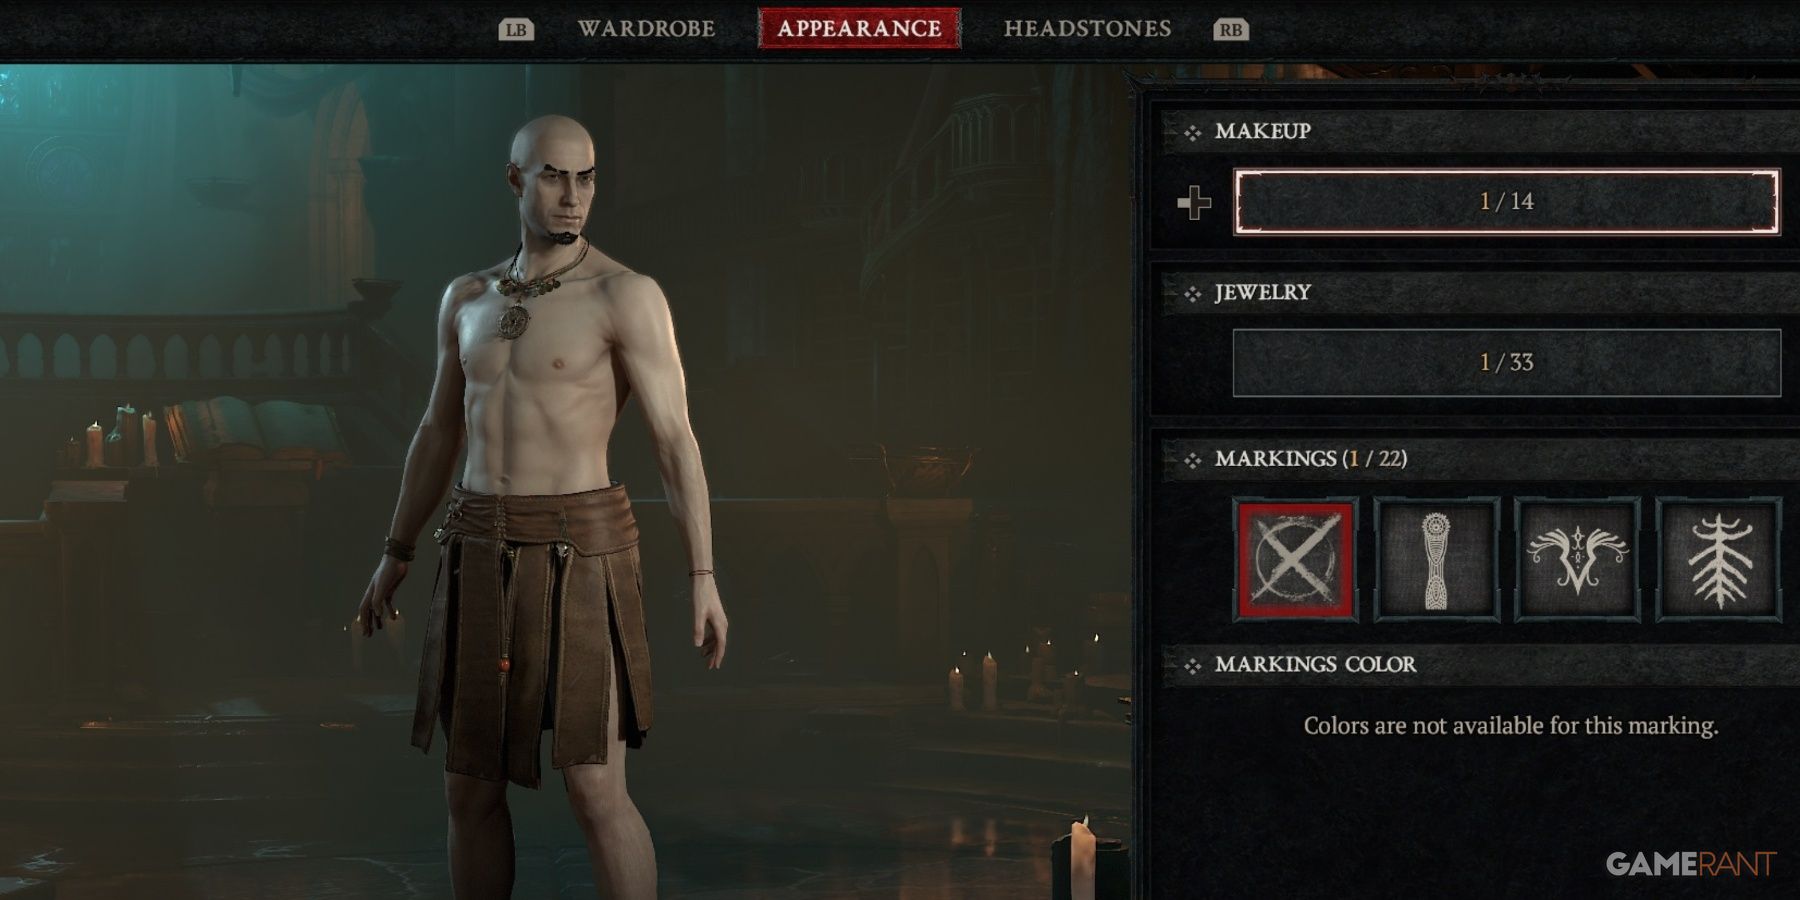 Diablo 4 Changing Appearance At A Wardrobe